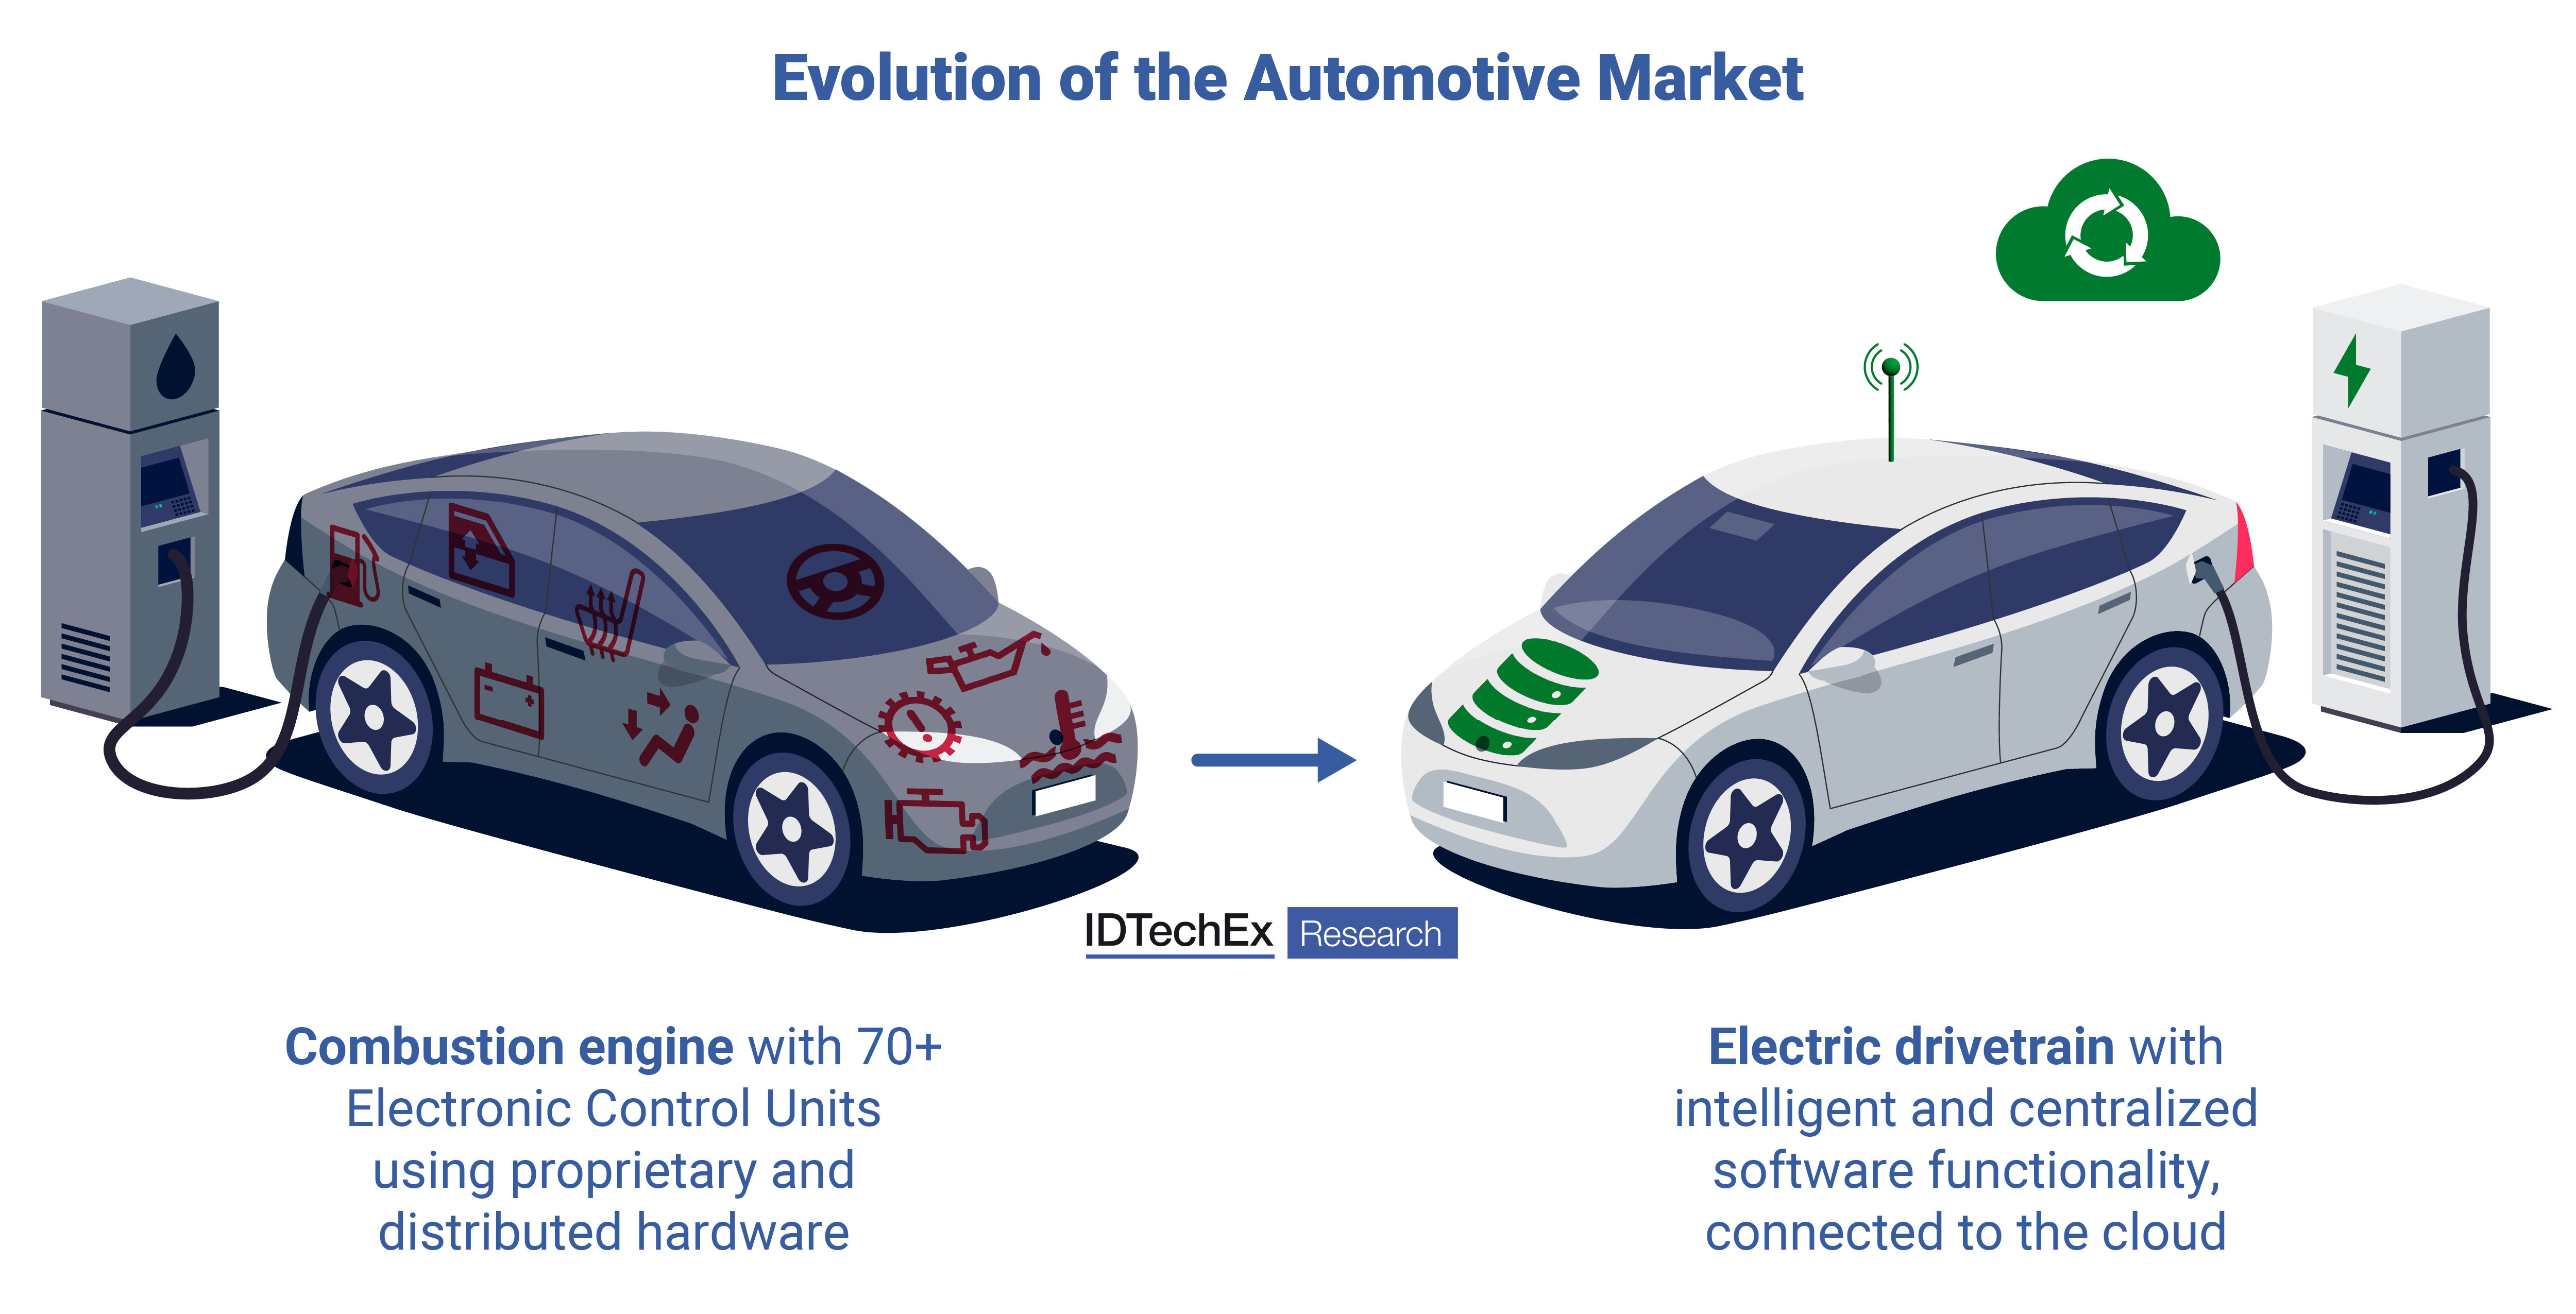 The automotive market is evolving, becoming more electrified, autonomous, and software-defined. Source IDTechEx.png